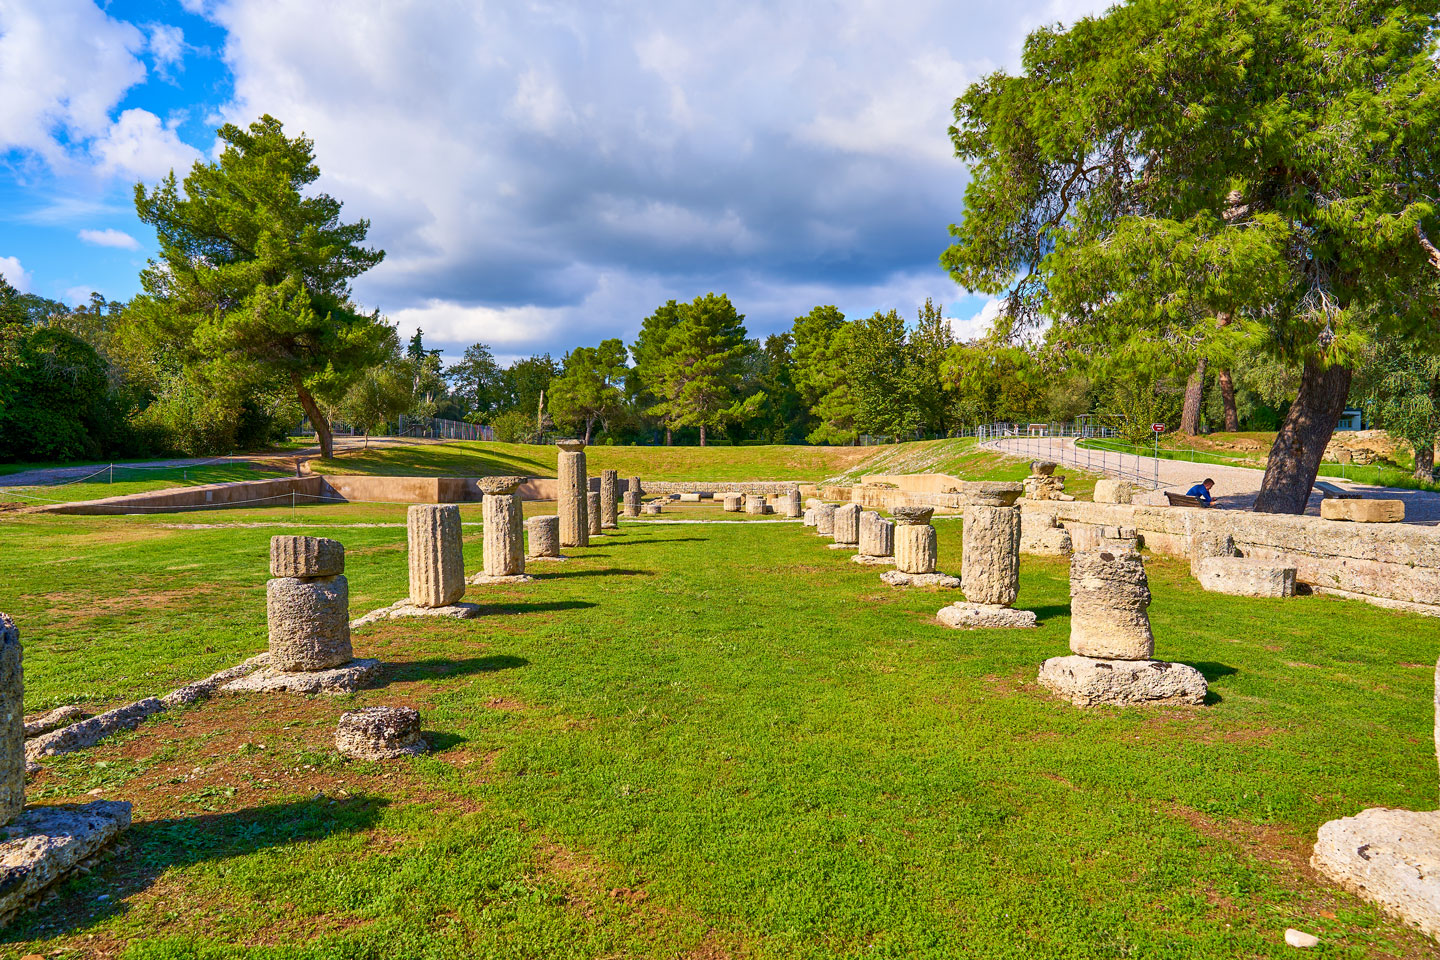 Remains of the Gymnasium of Ancient Olympia, Greece